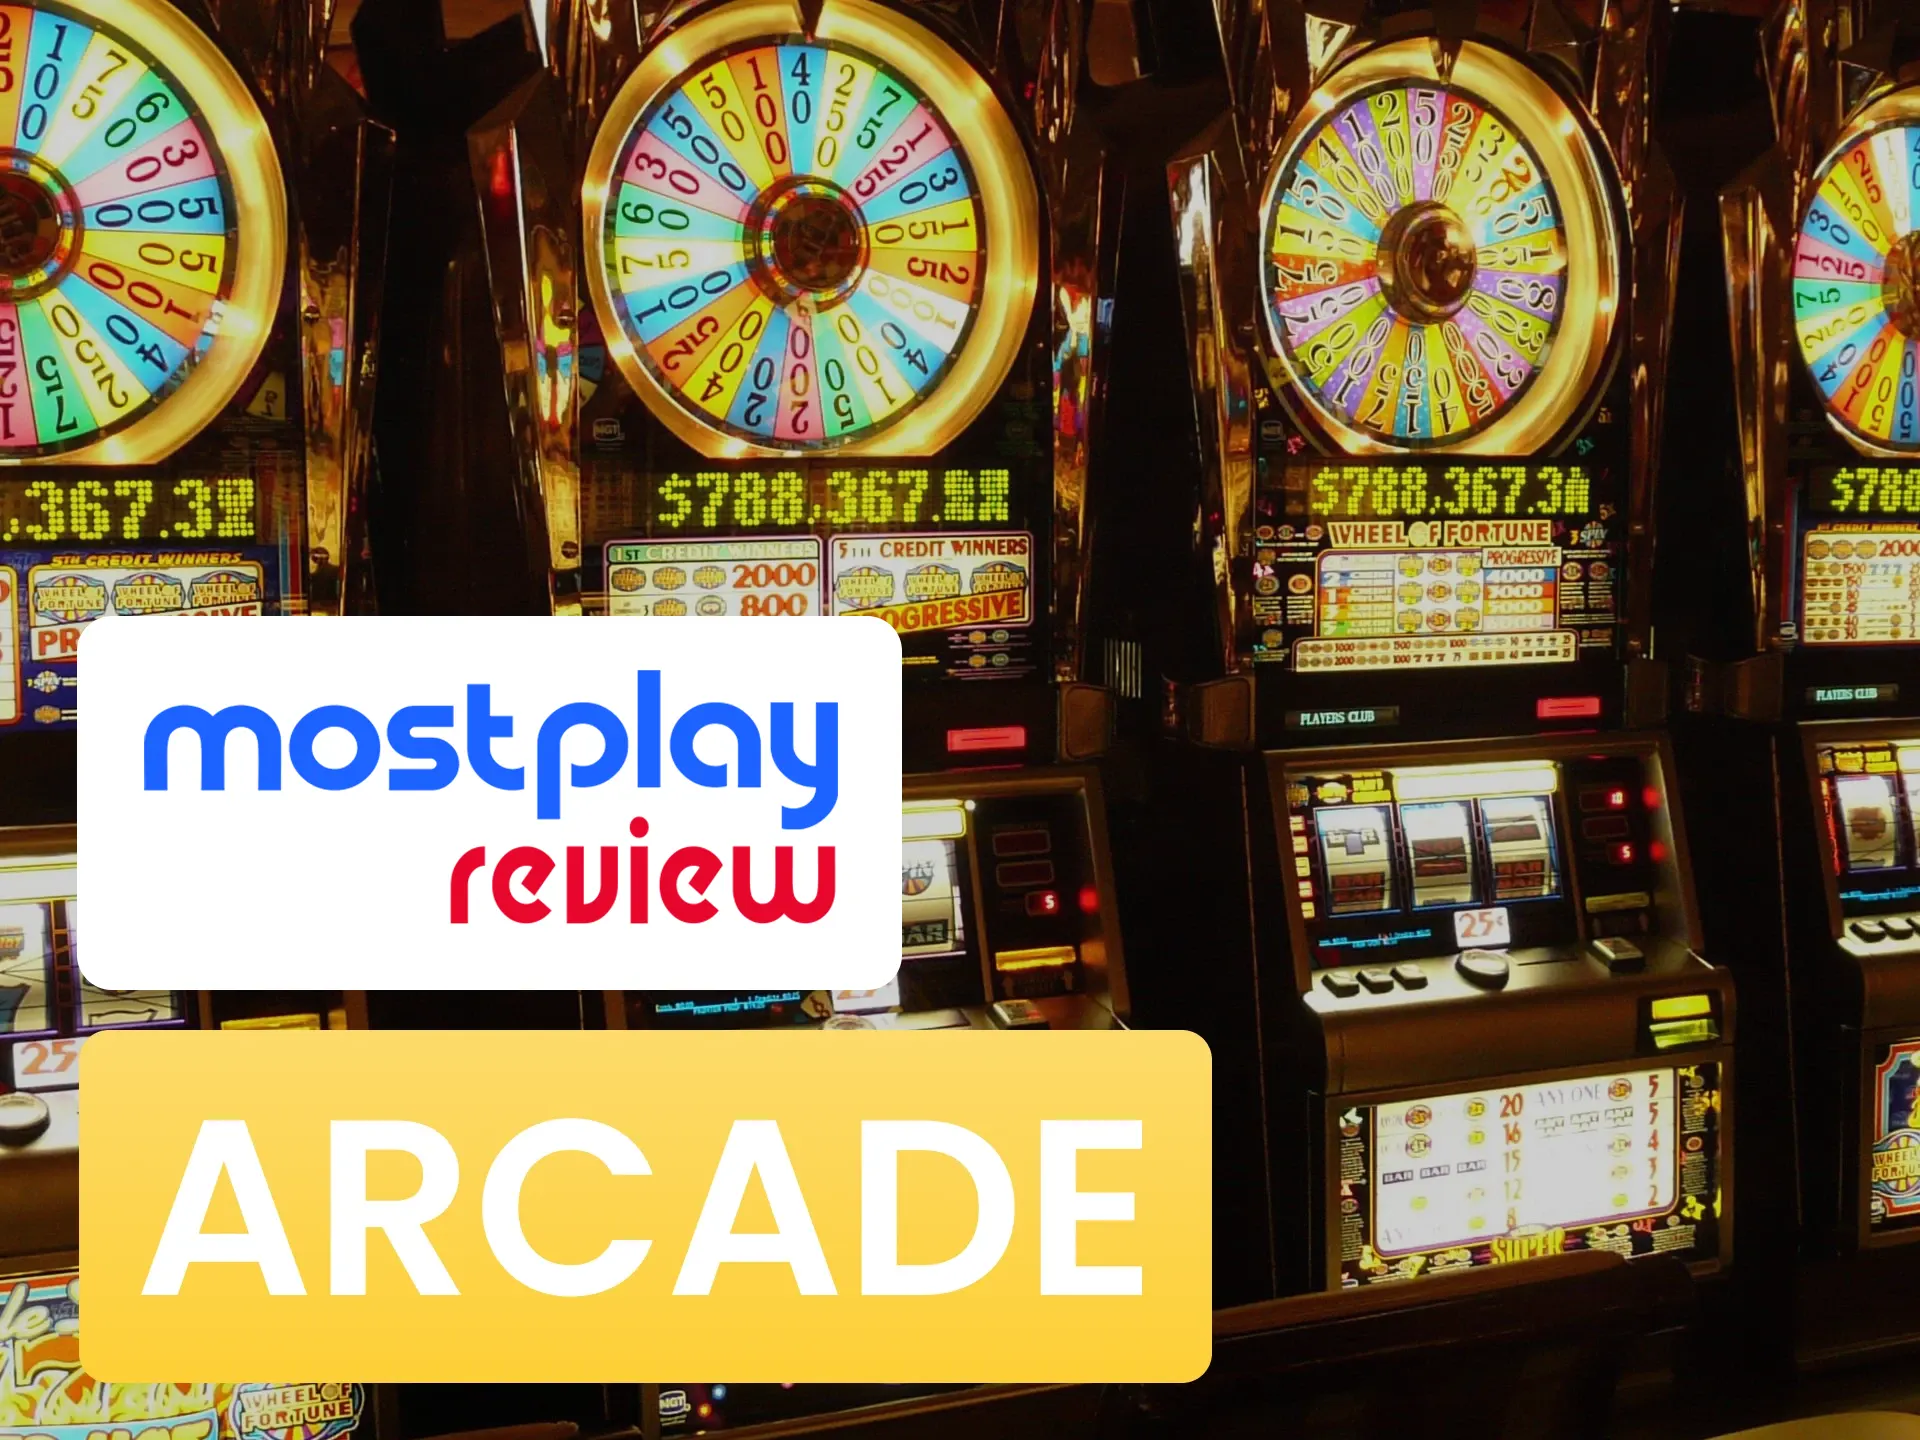 Win a lot of money by playing the Mostplay arcade games.